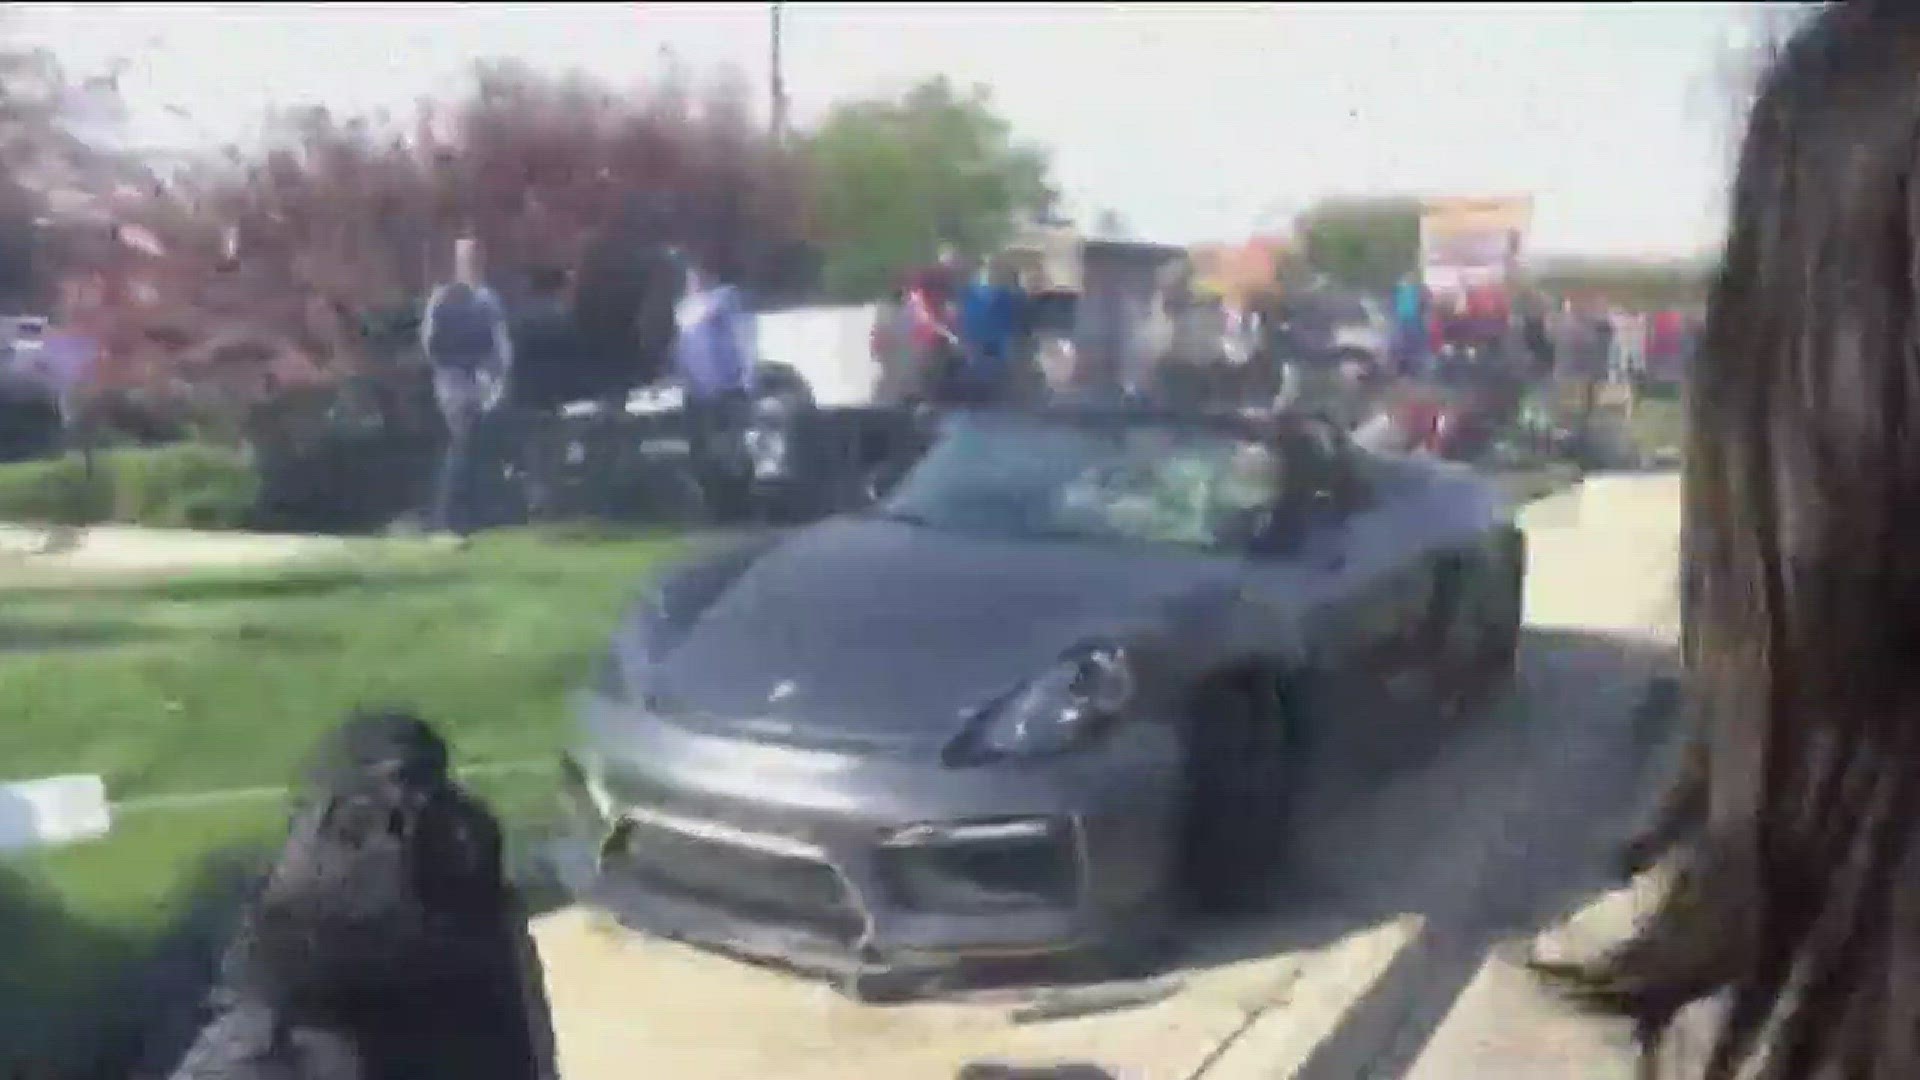 Police say the driver of a Porsche Spyder accelerated rapidly while leaving the Cars and Coffee event and lost control of his car, which went into the crowd.